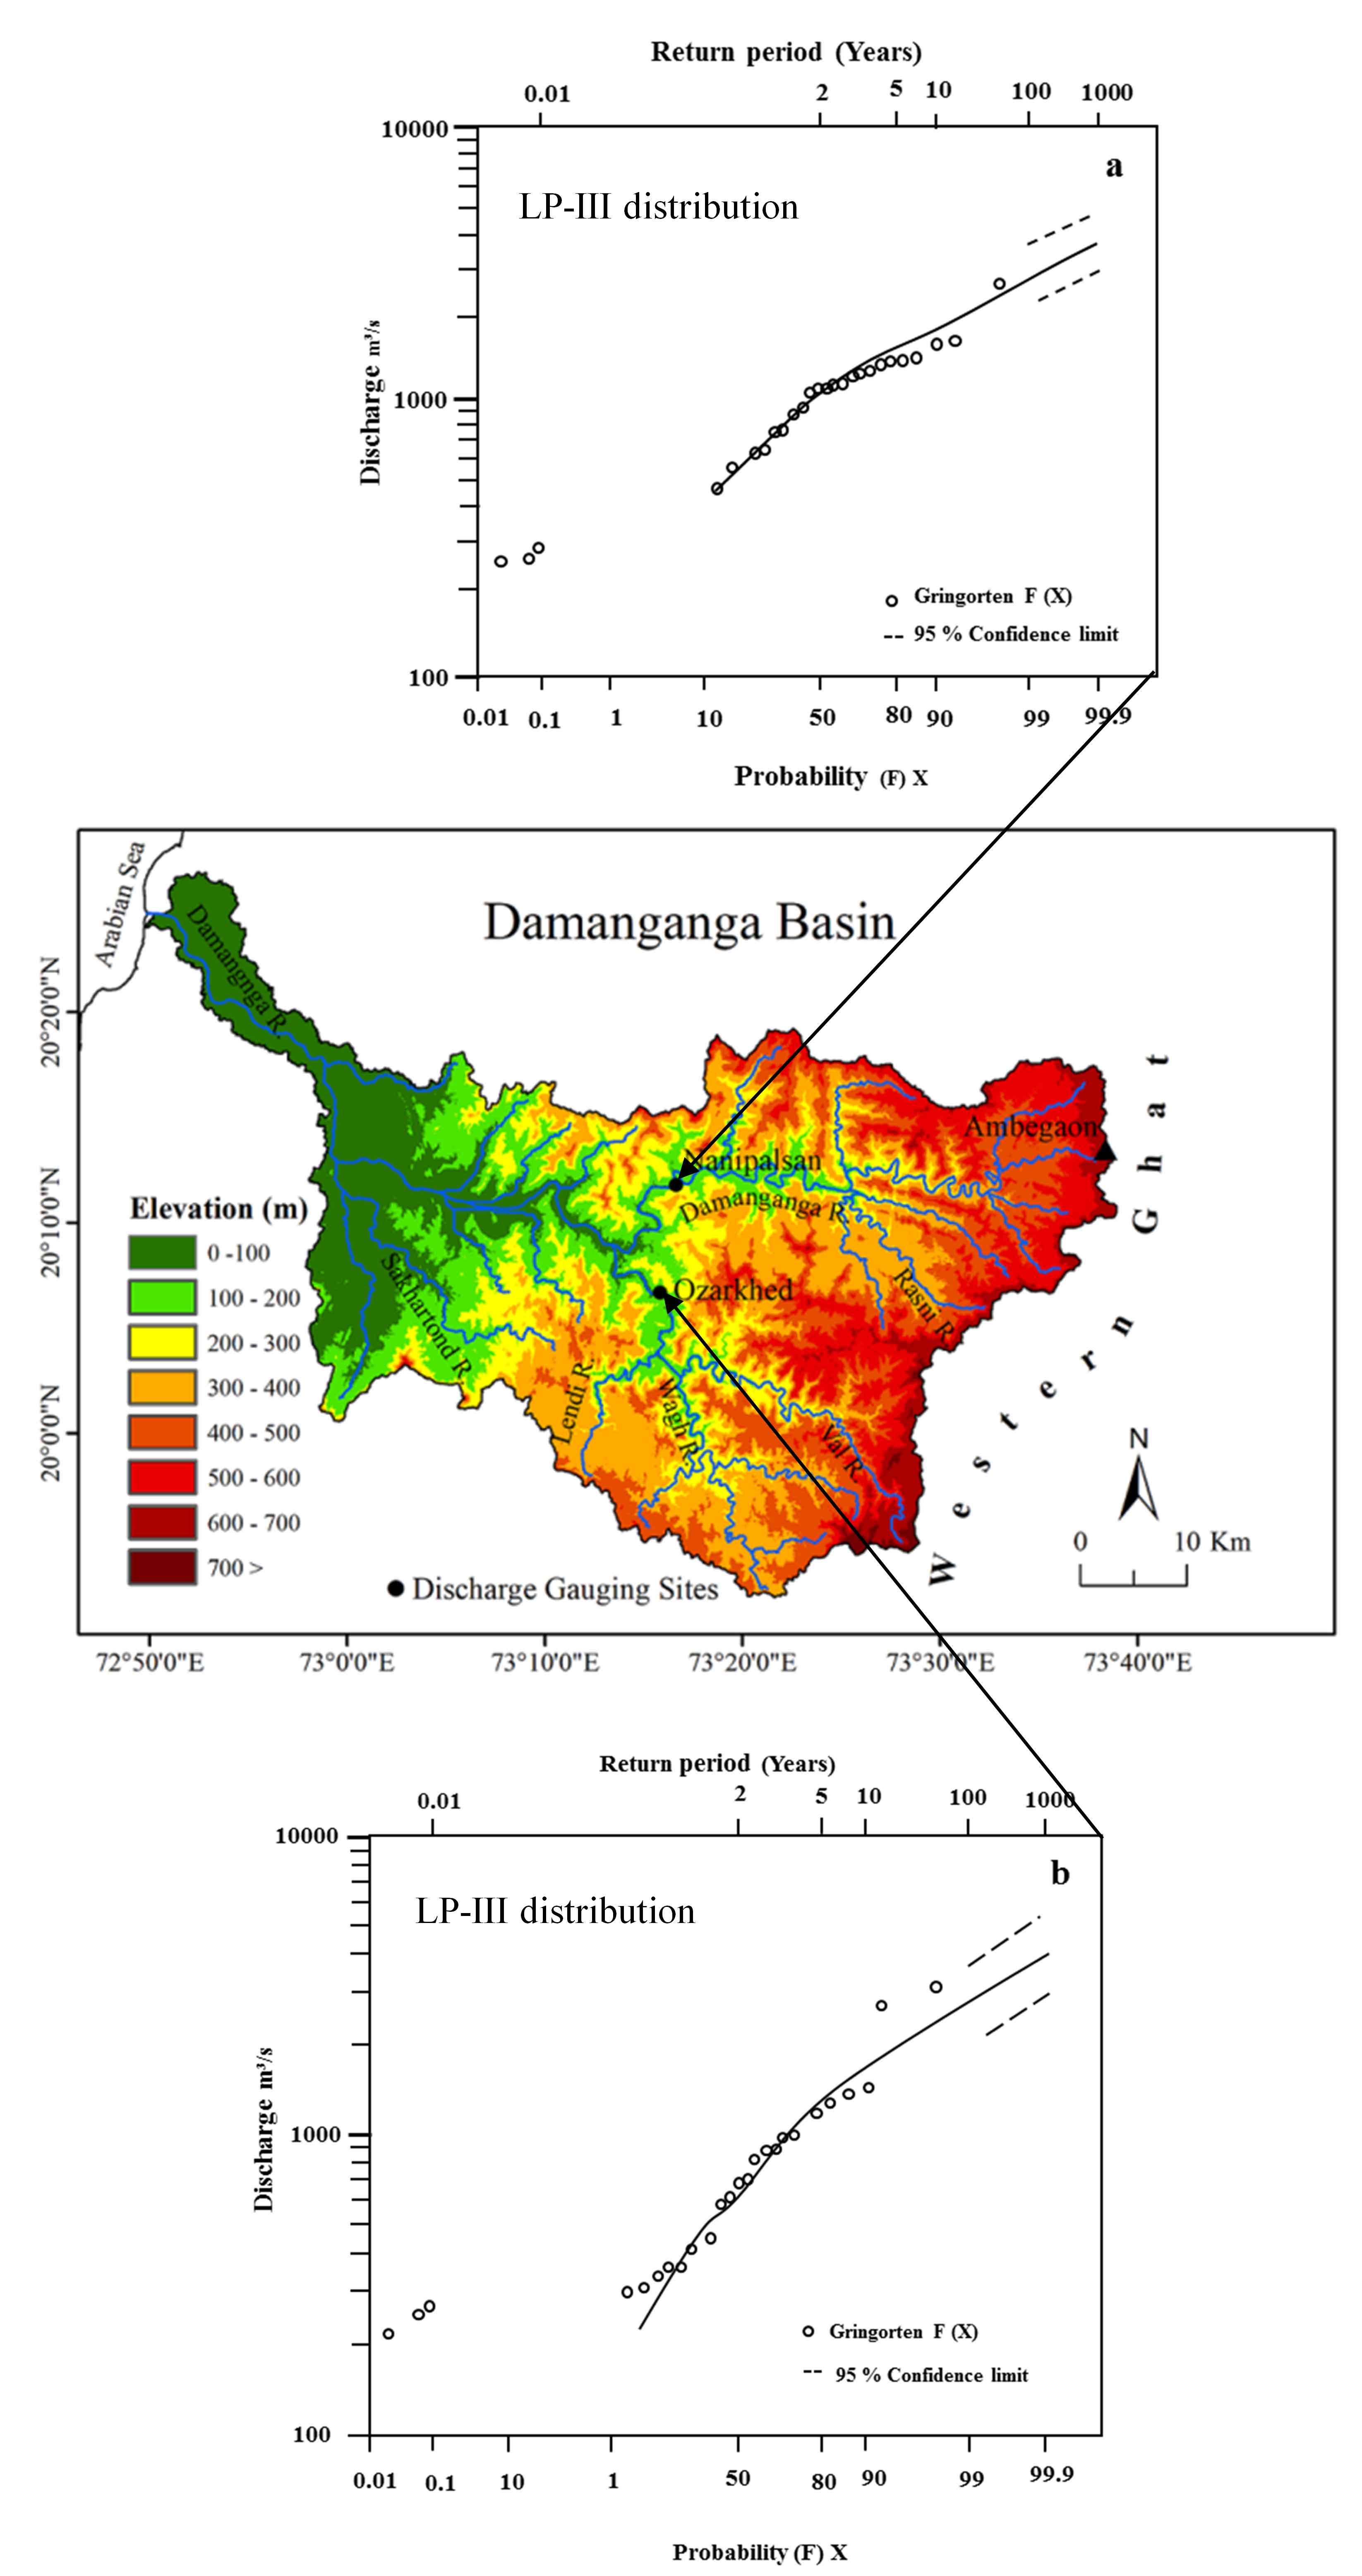 Analysis of Magnitude and Frequency of Floods in the Damanganga Basin: Western India